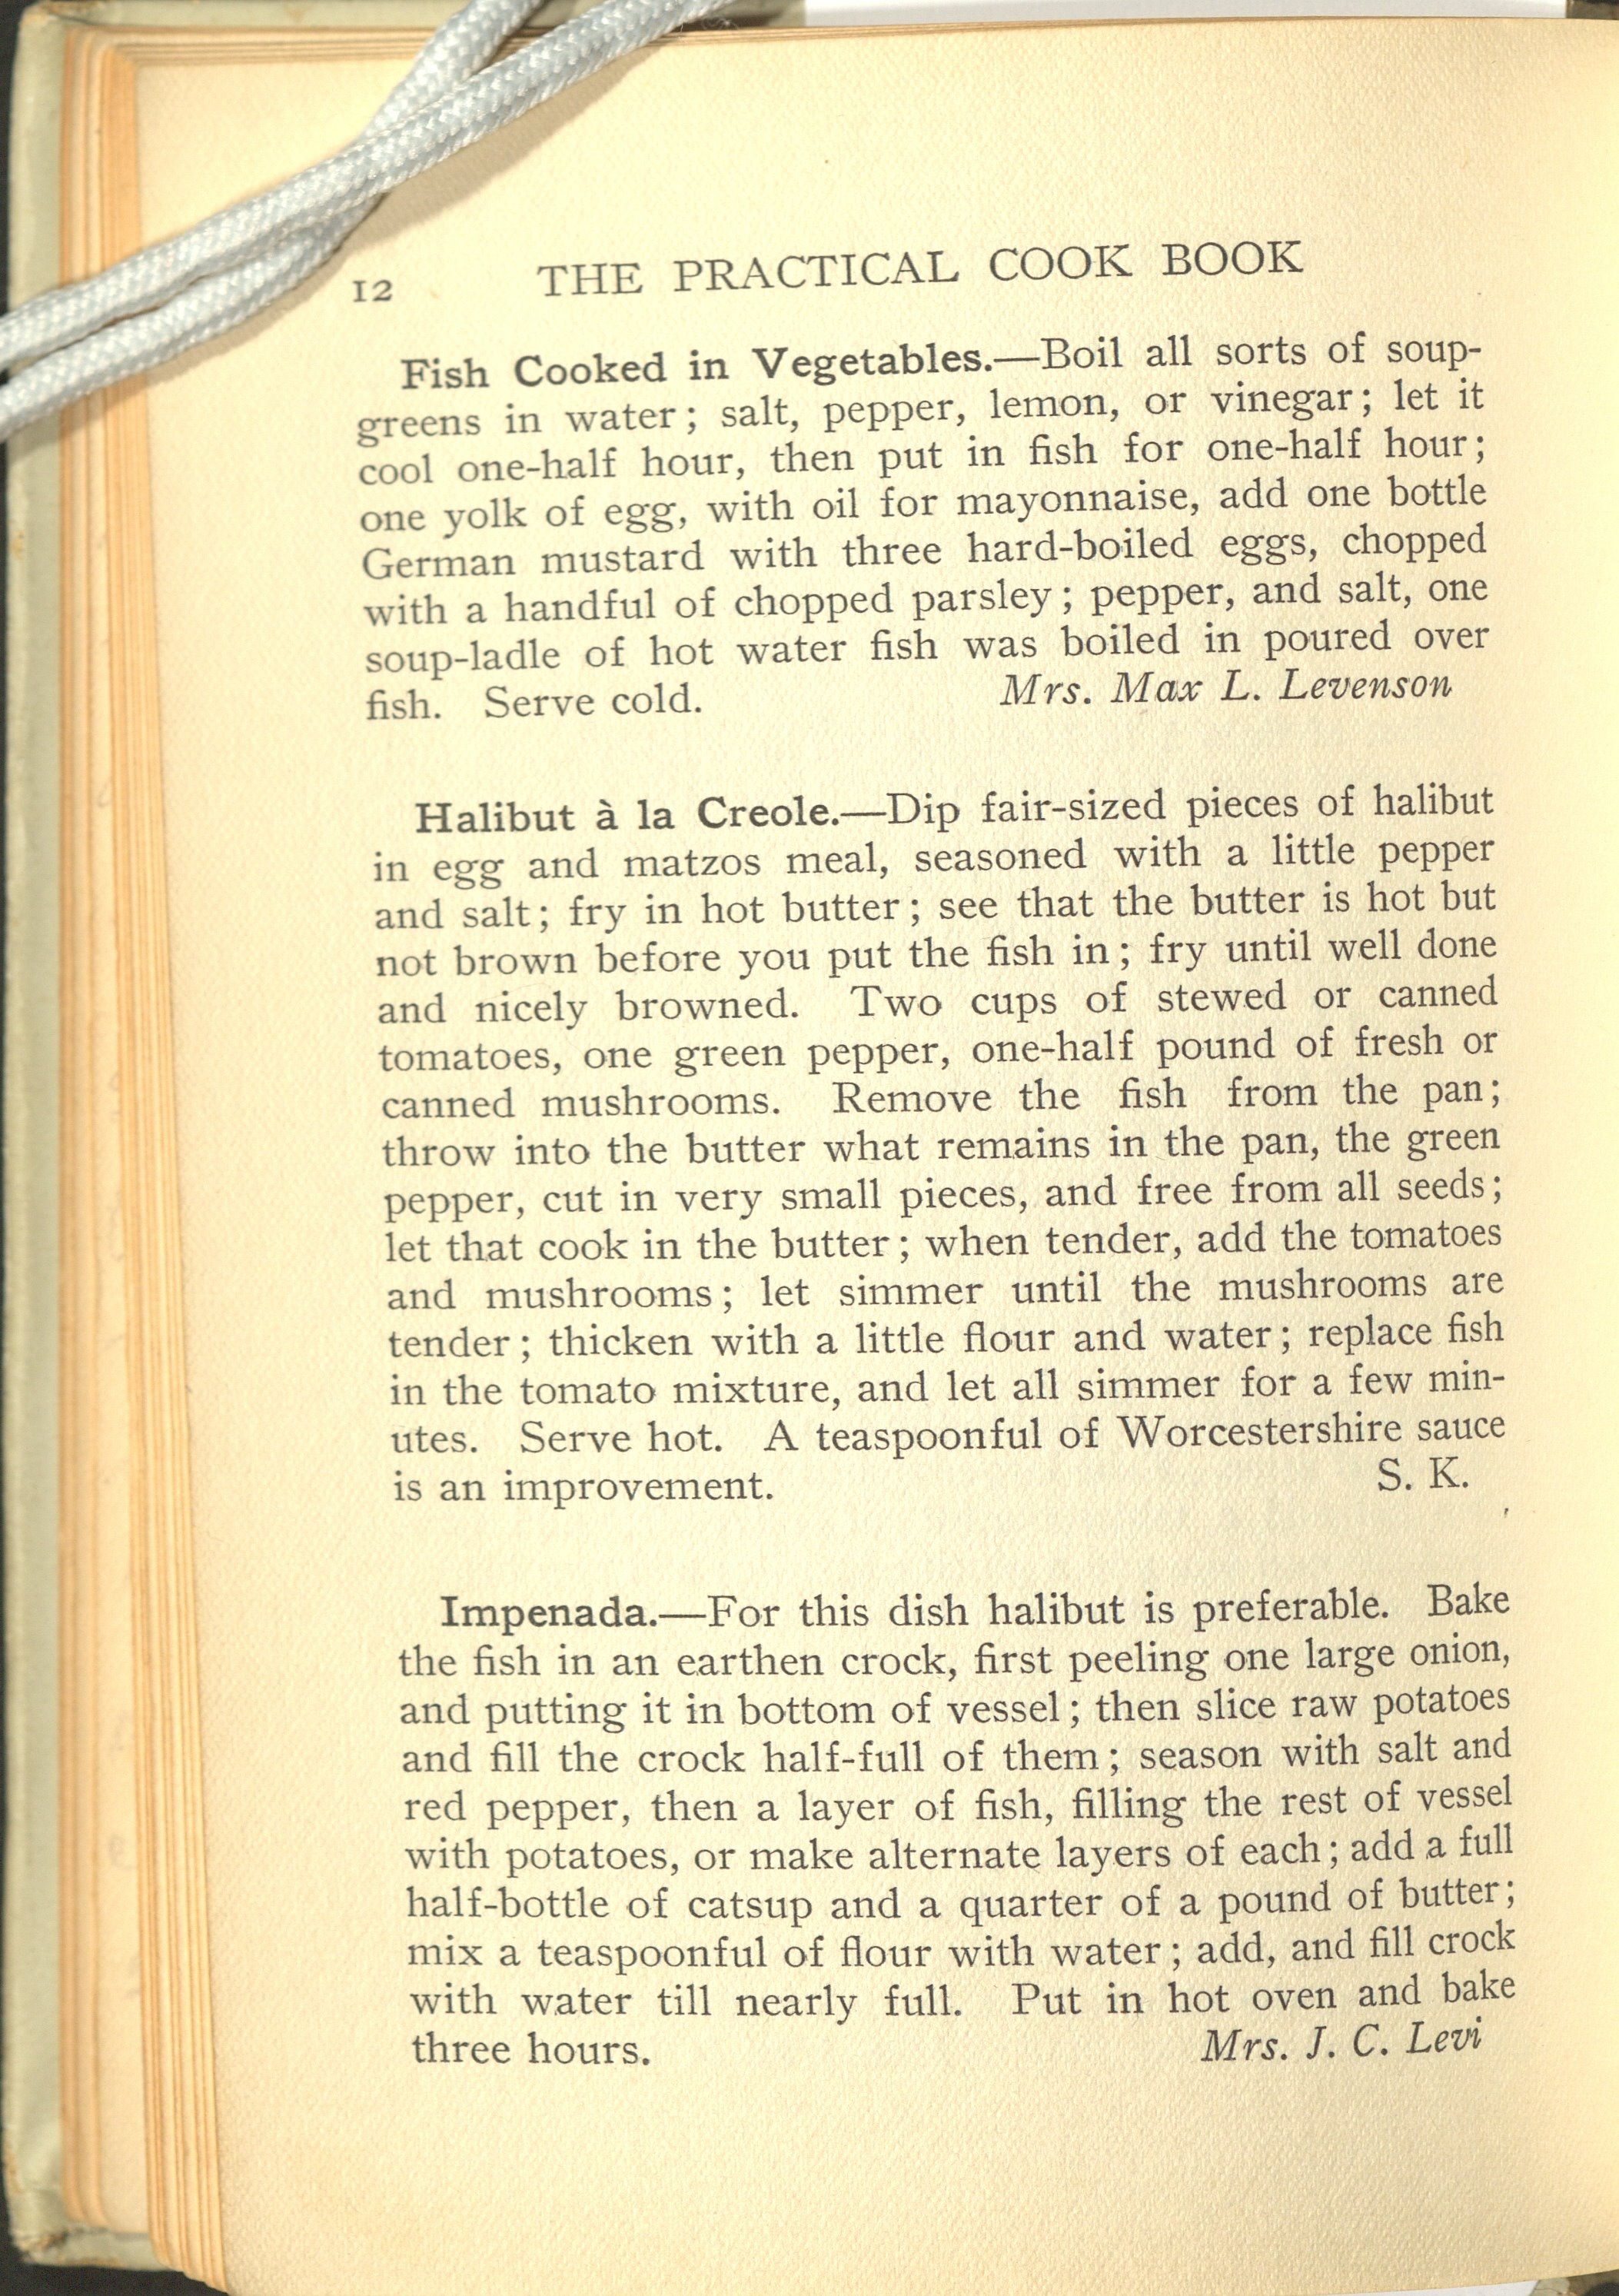 Page containing three recipes in paragraph form: Fish Cooked in Vegetables; Halibut a la Creole; and Impenada